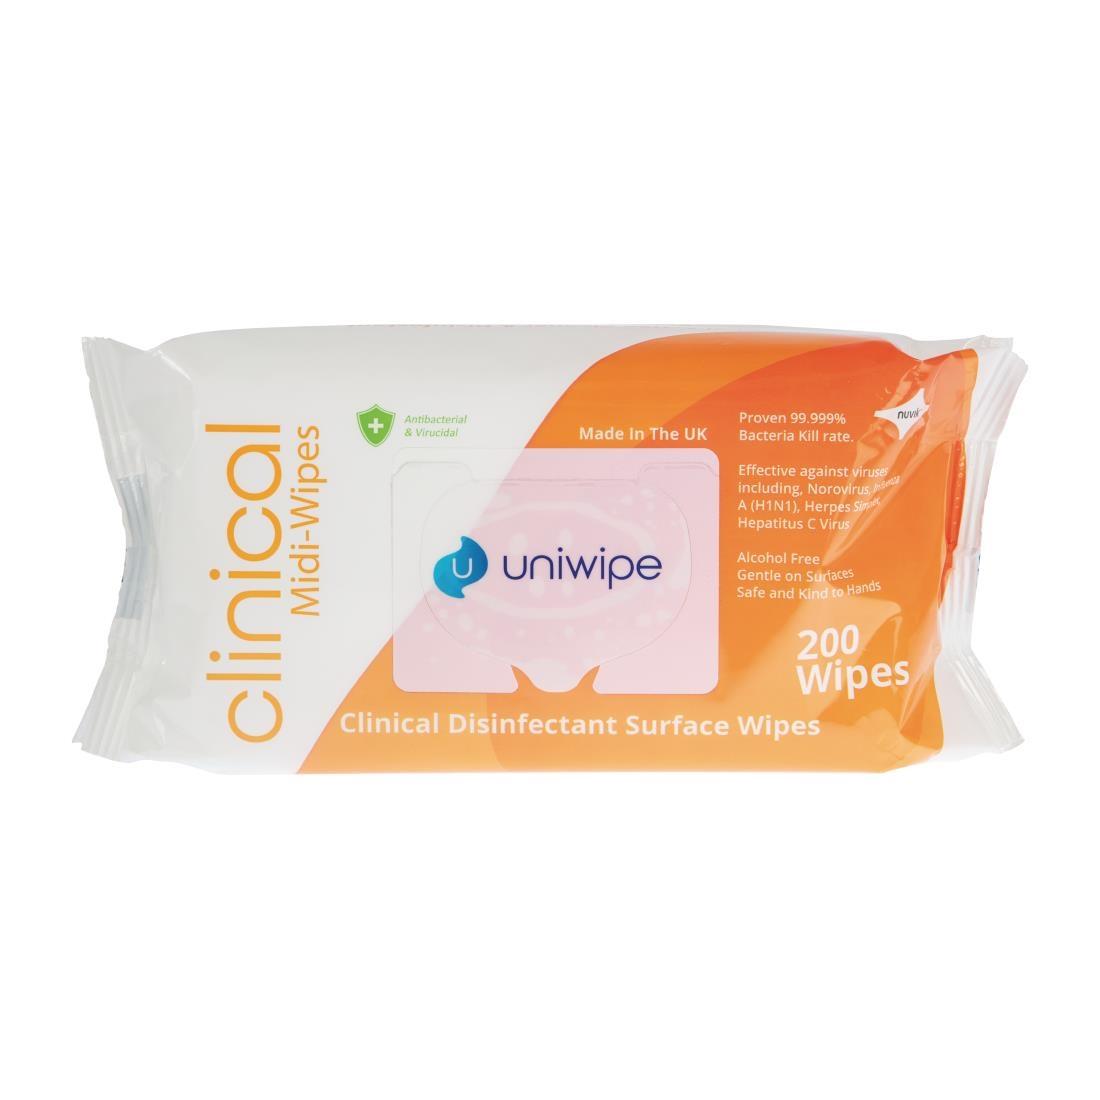 Uniwipe Clinical Disinfectant Surface Wipes (Pack of 200) - DF234  - 1